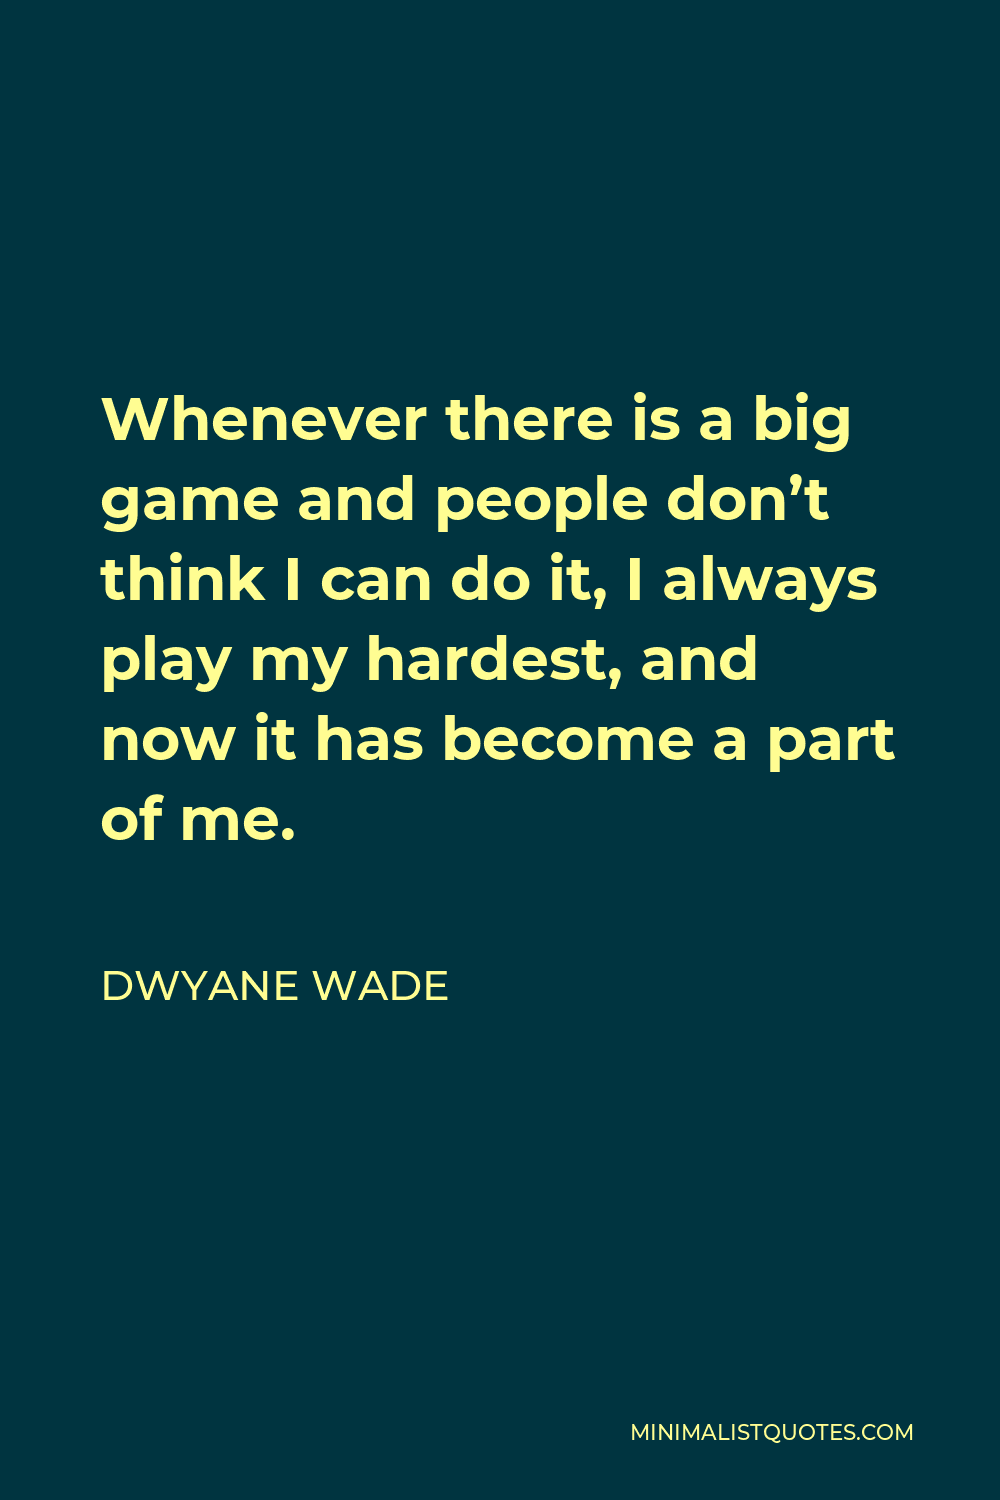 Dwyane Wade Quote - Whenever there is a big game and people don’t think I can do it, I always play my hardest, and now it has become a part of me.